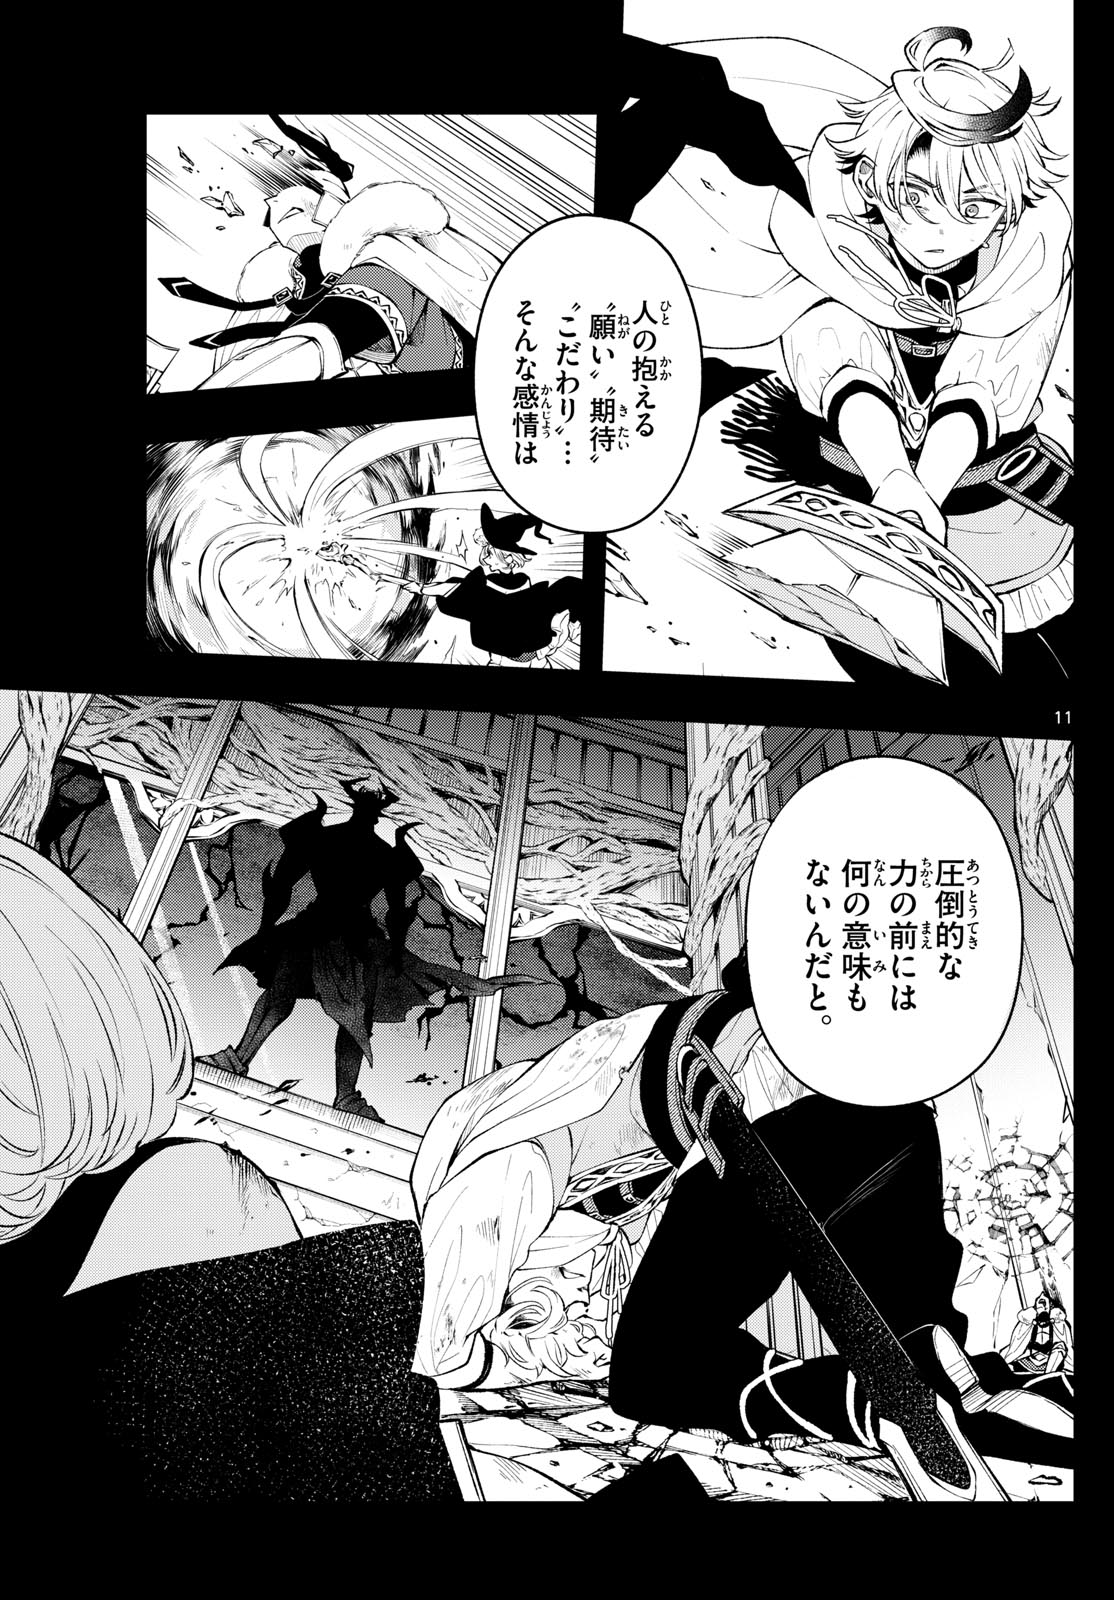 Albus Changes the World 廻天のアルバス 第5話 - Page 9